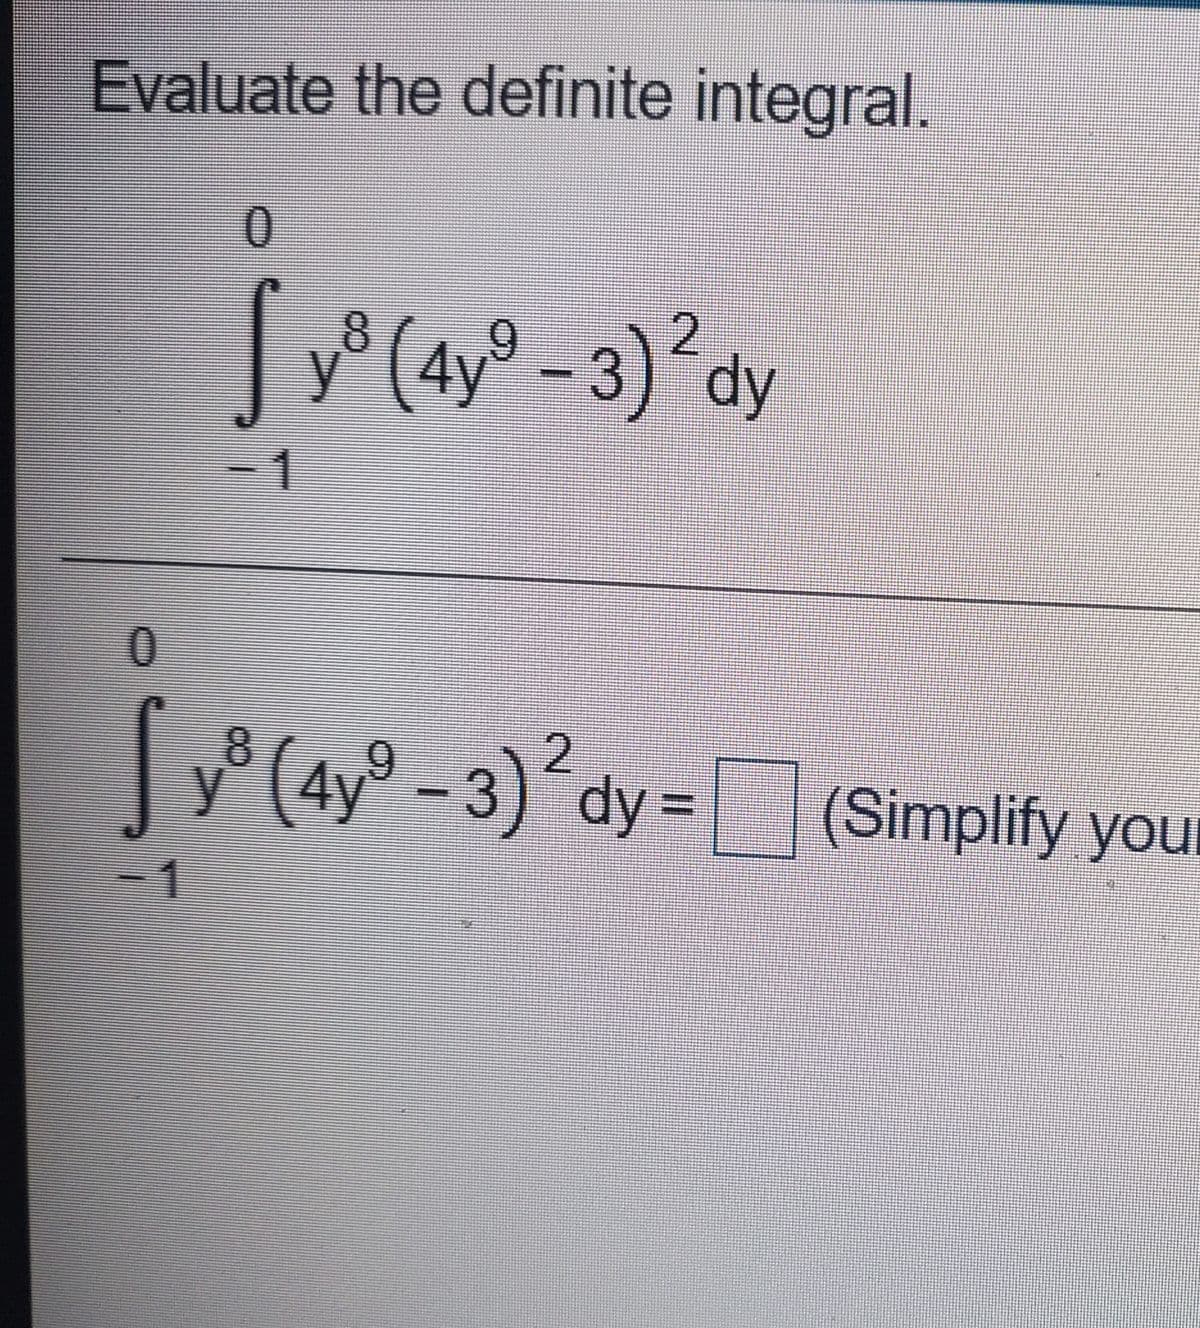 Evaluate the definite integral.
( -3) dy
2
=1
( -3) dy=Simpify you
8.
2.
-1
